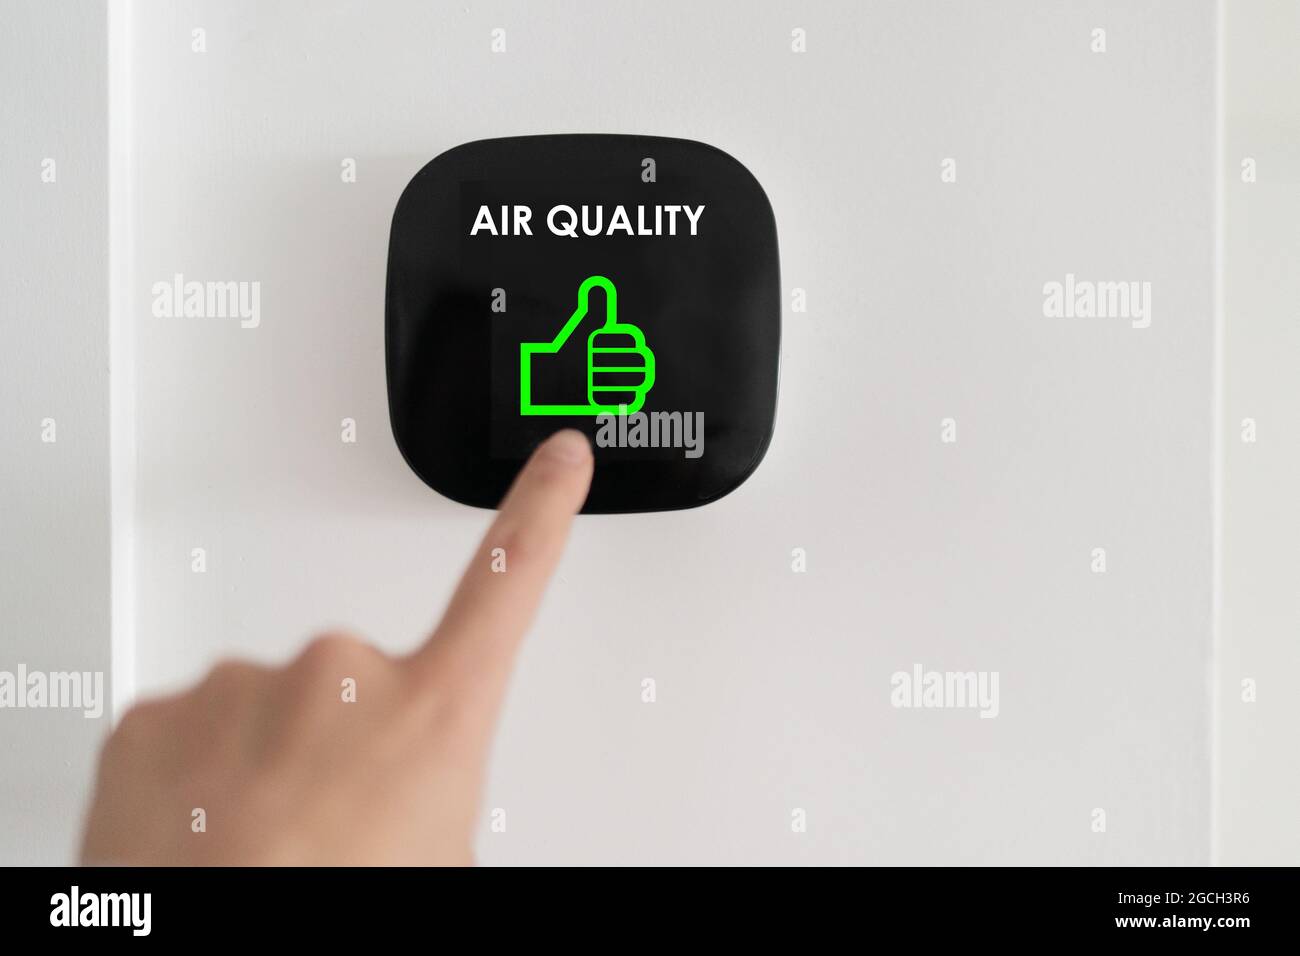 Good air quality indoor smart home domotic touchscreen system. air. Woman touching touchscreen checking air purifier filter at green level with thumbs Stock Photo